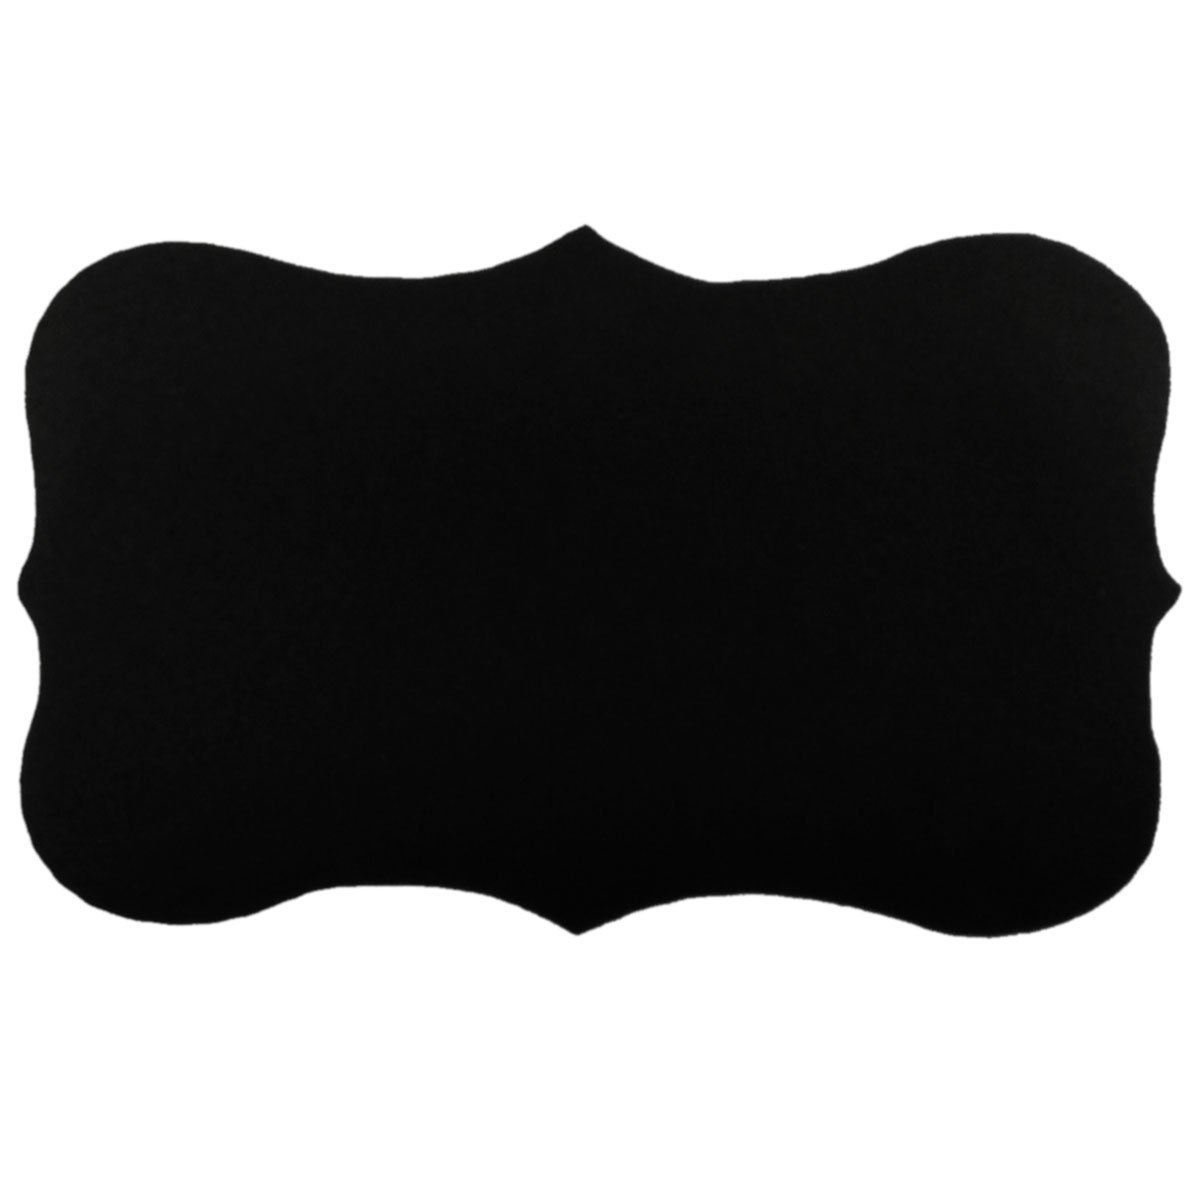 Free Chalkboard Label Png, Download Free Clip Art, Free Clip